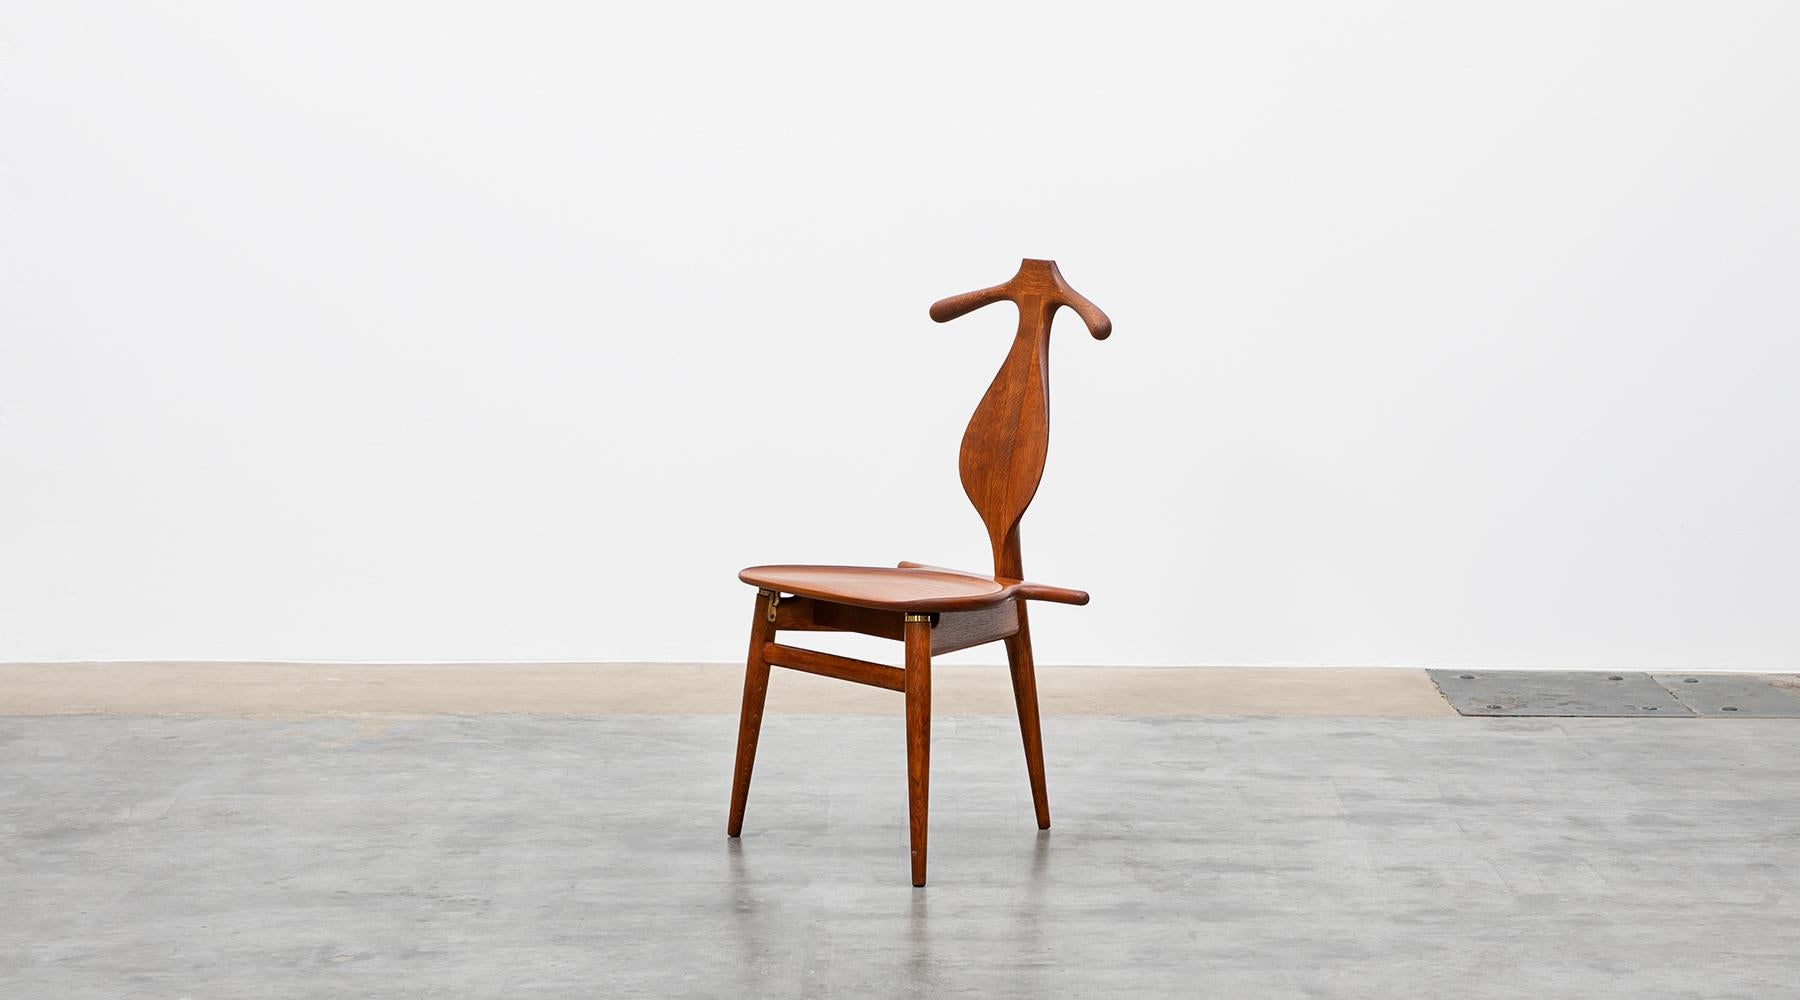 Valet chair, oak, teak, brass details, by Hans Wegner, Denmark, 1953.

A wonderful example of a masterpiece by the famous Hans Wegner. A practical Valet chair that is completely organically shaped. The seat can be folded up so that it can also be